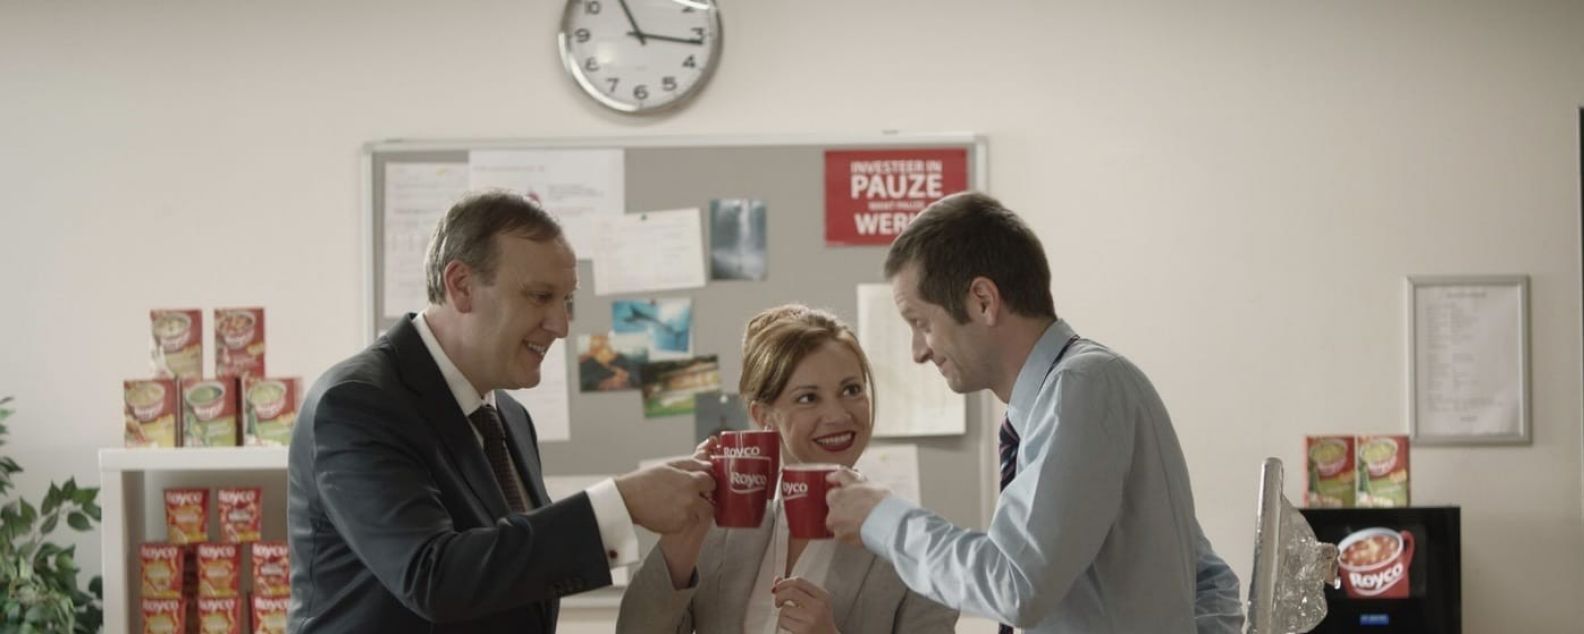 Three office workers toasting with coffee cups